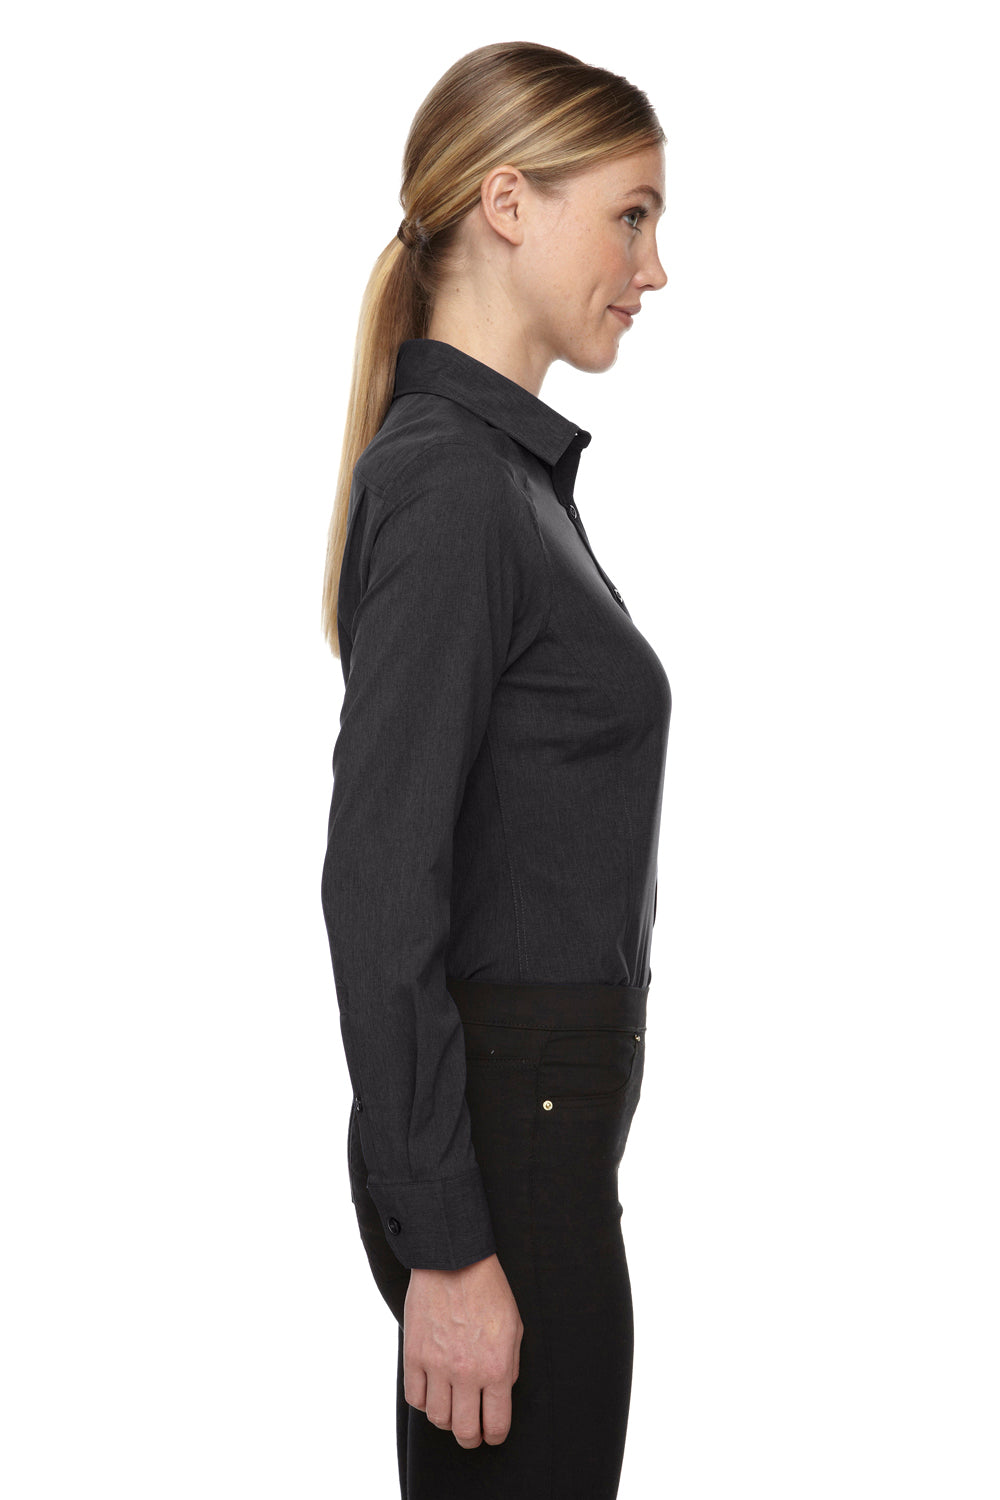 North End 78802 Womens Sport Blue Performance Moisture Wicking Long Sleeve Button Down Shirt Heather Carbon Grey Side